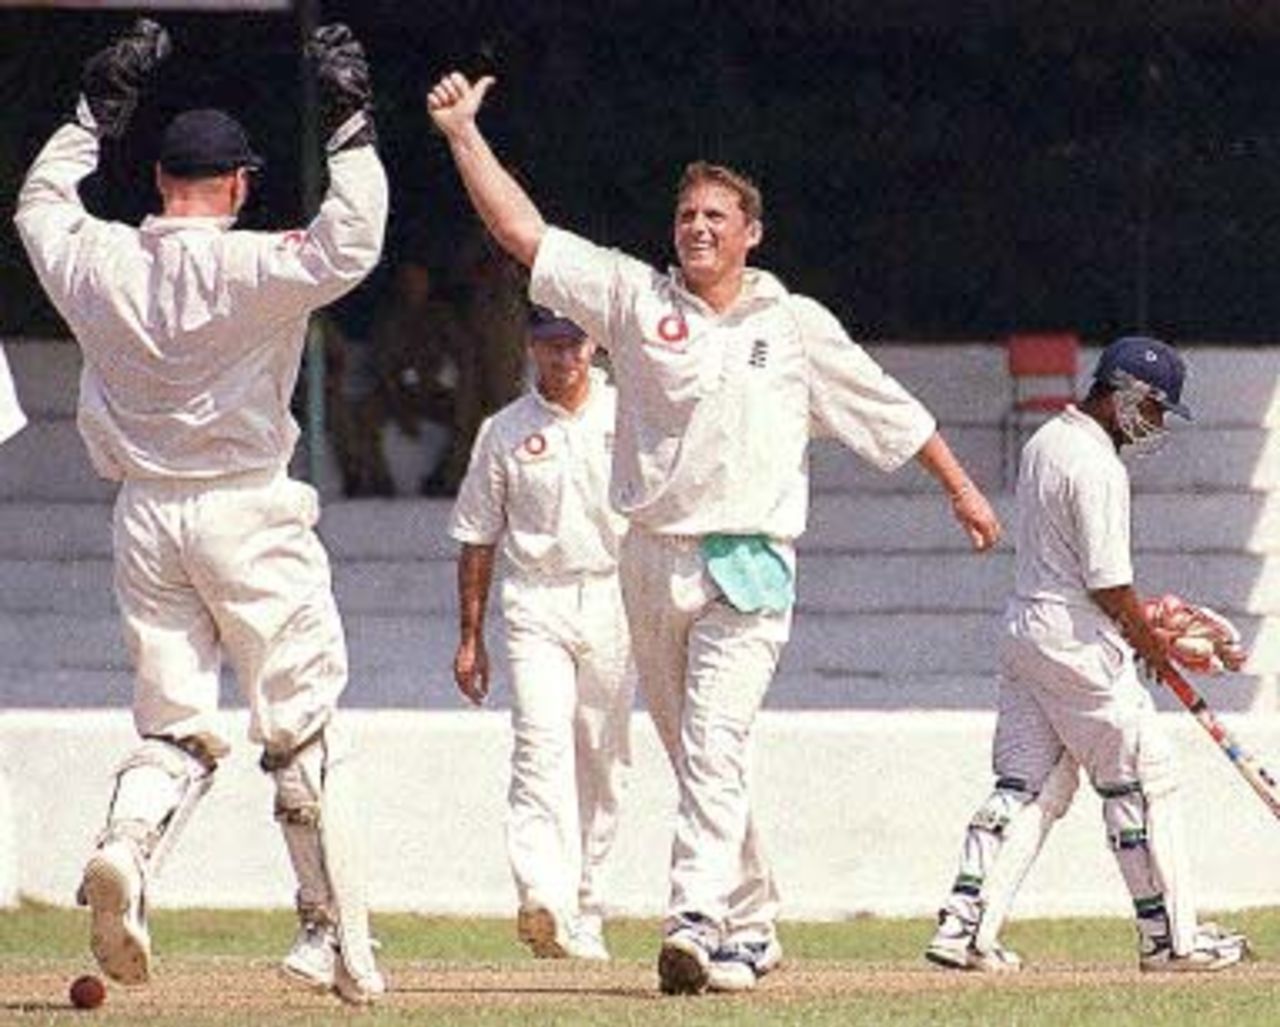 England bowler Darren Gough (C) celebrates 06 February 2001 with wicket keeper Paul Nixon (L - back to camera) and England skipper Nasser Hussain (partly covered) as he takes the wicket of Sri Lankan batsman Predeep Hewage (not in picture). England opened their tour off Sri lanka with a two-day match against a Sri Lankan Colts team. Batsman at non-strikers end is Malintha Perera.